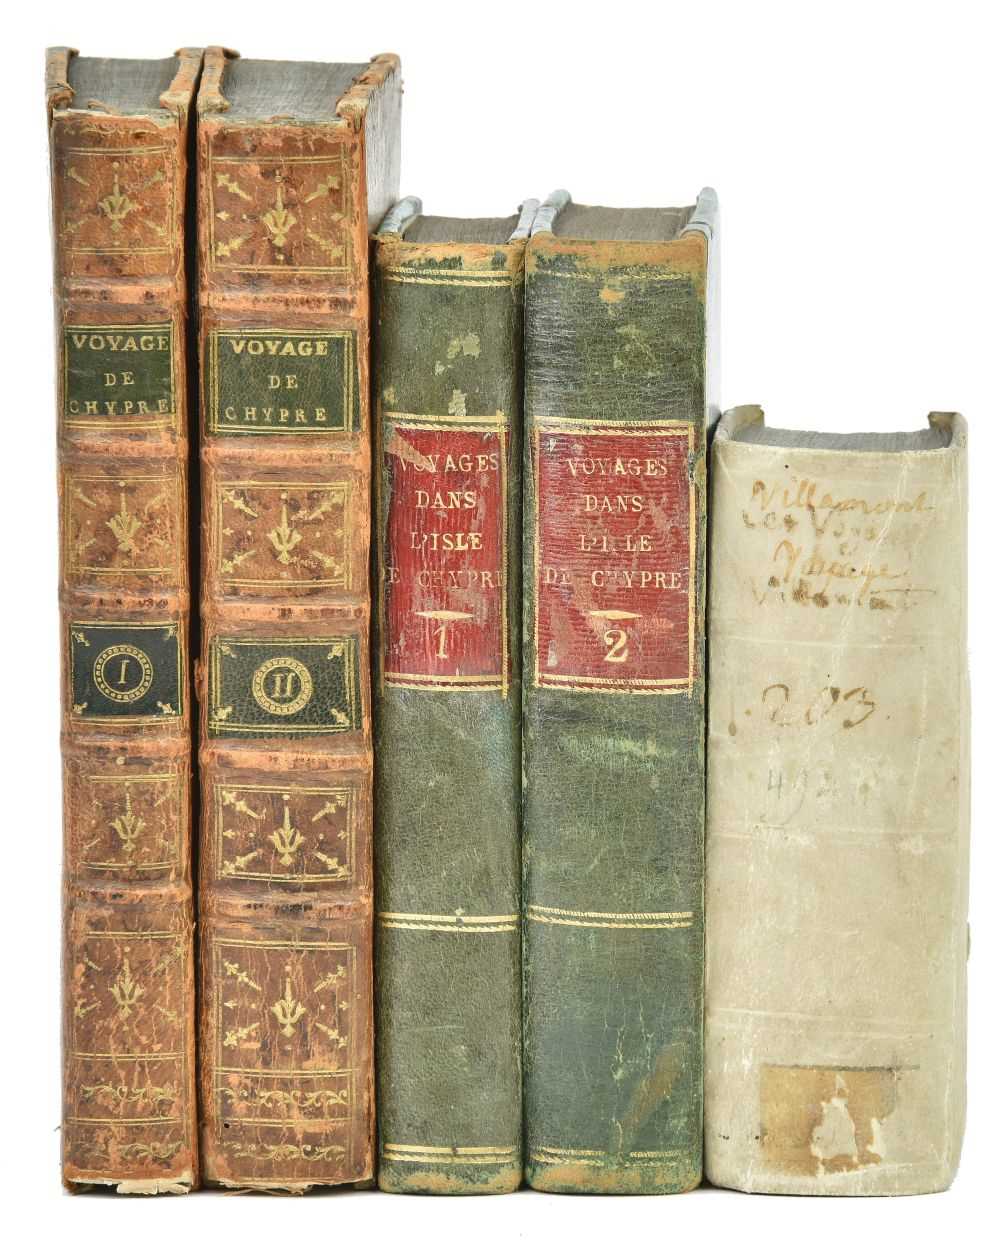 Lot 25 - Mariti (Giovanni). Voyages dans l'isle de Chypre, 1st and 2nd editions in French, 1791